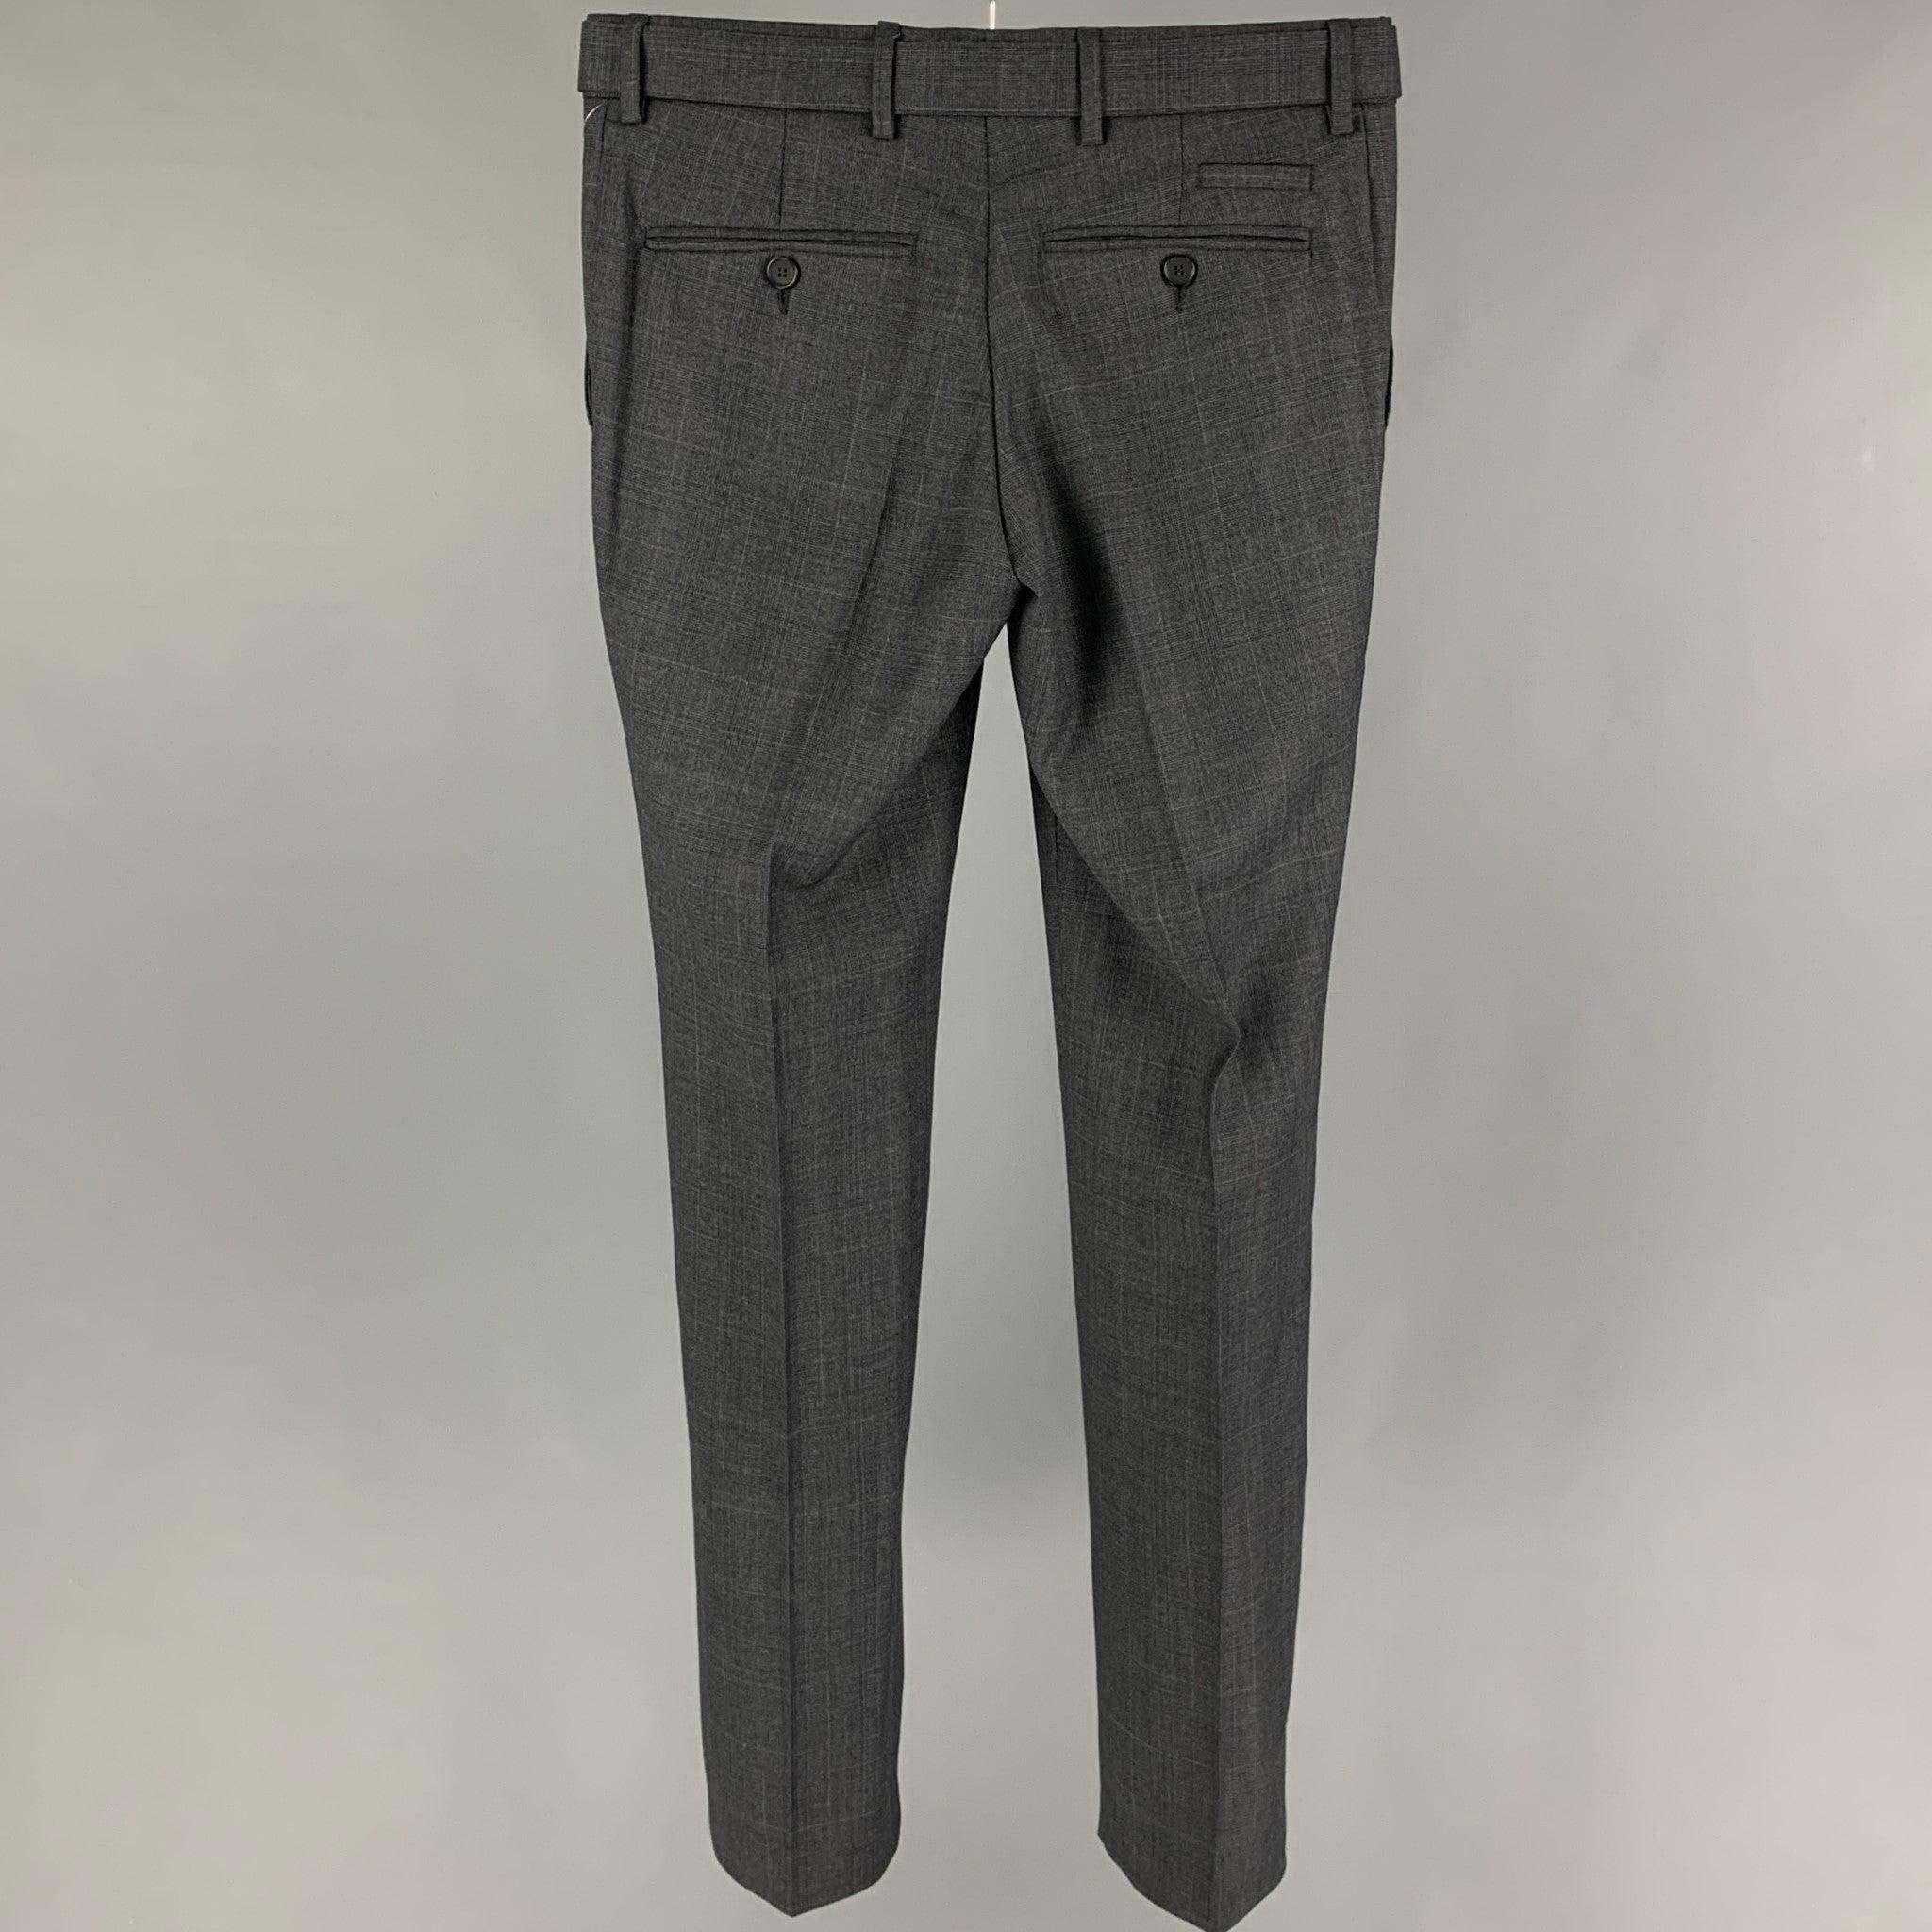 THE KOOPLES dress pants comes in a charcoal & grey plaid wool featuring a slim fit, belted, and a zip fly closure. Very Good
Pre-Owned Condition. 

Marked:   44 

Measurements: 
  Waist: 30 inches  Rise: 8.5 inches  Inseam: 32 inches 
  
  
